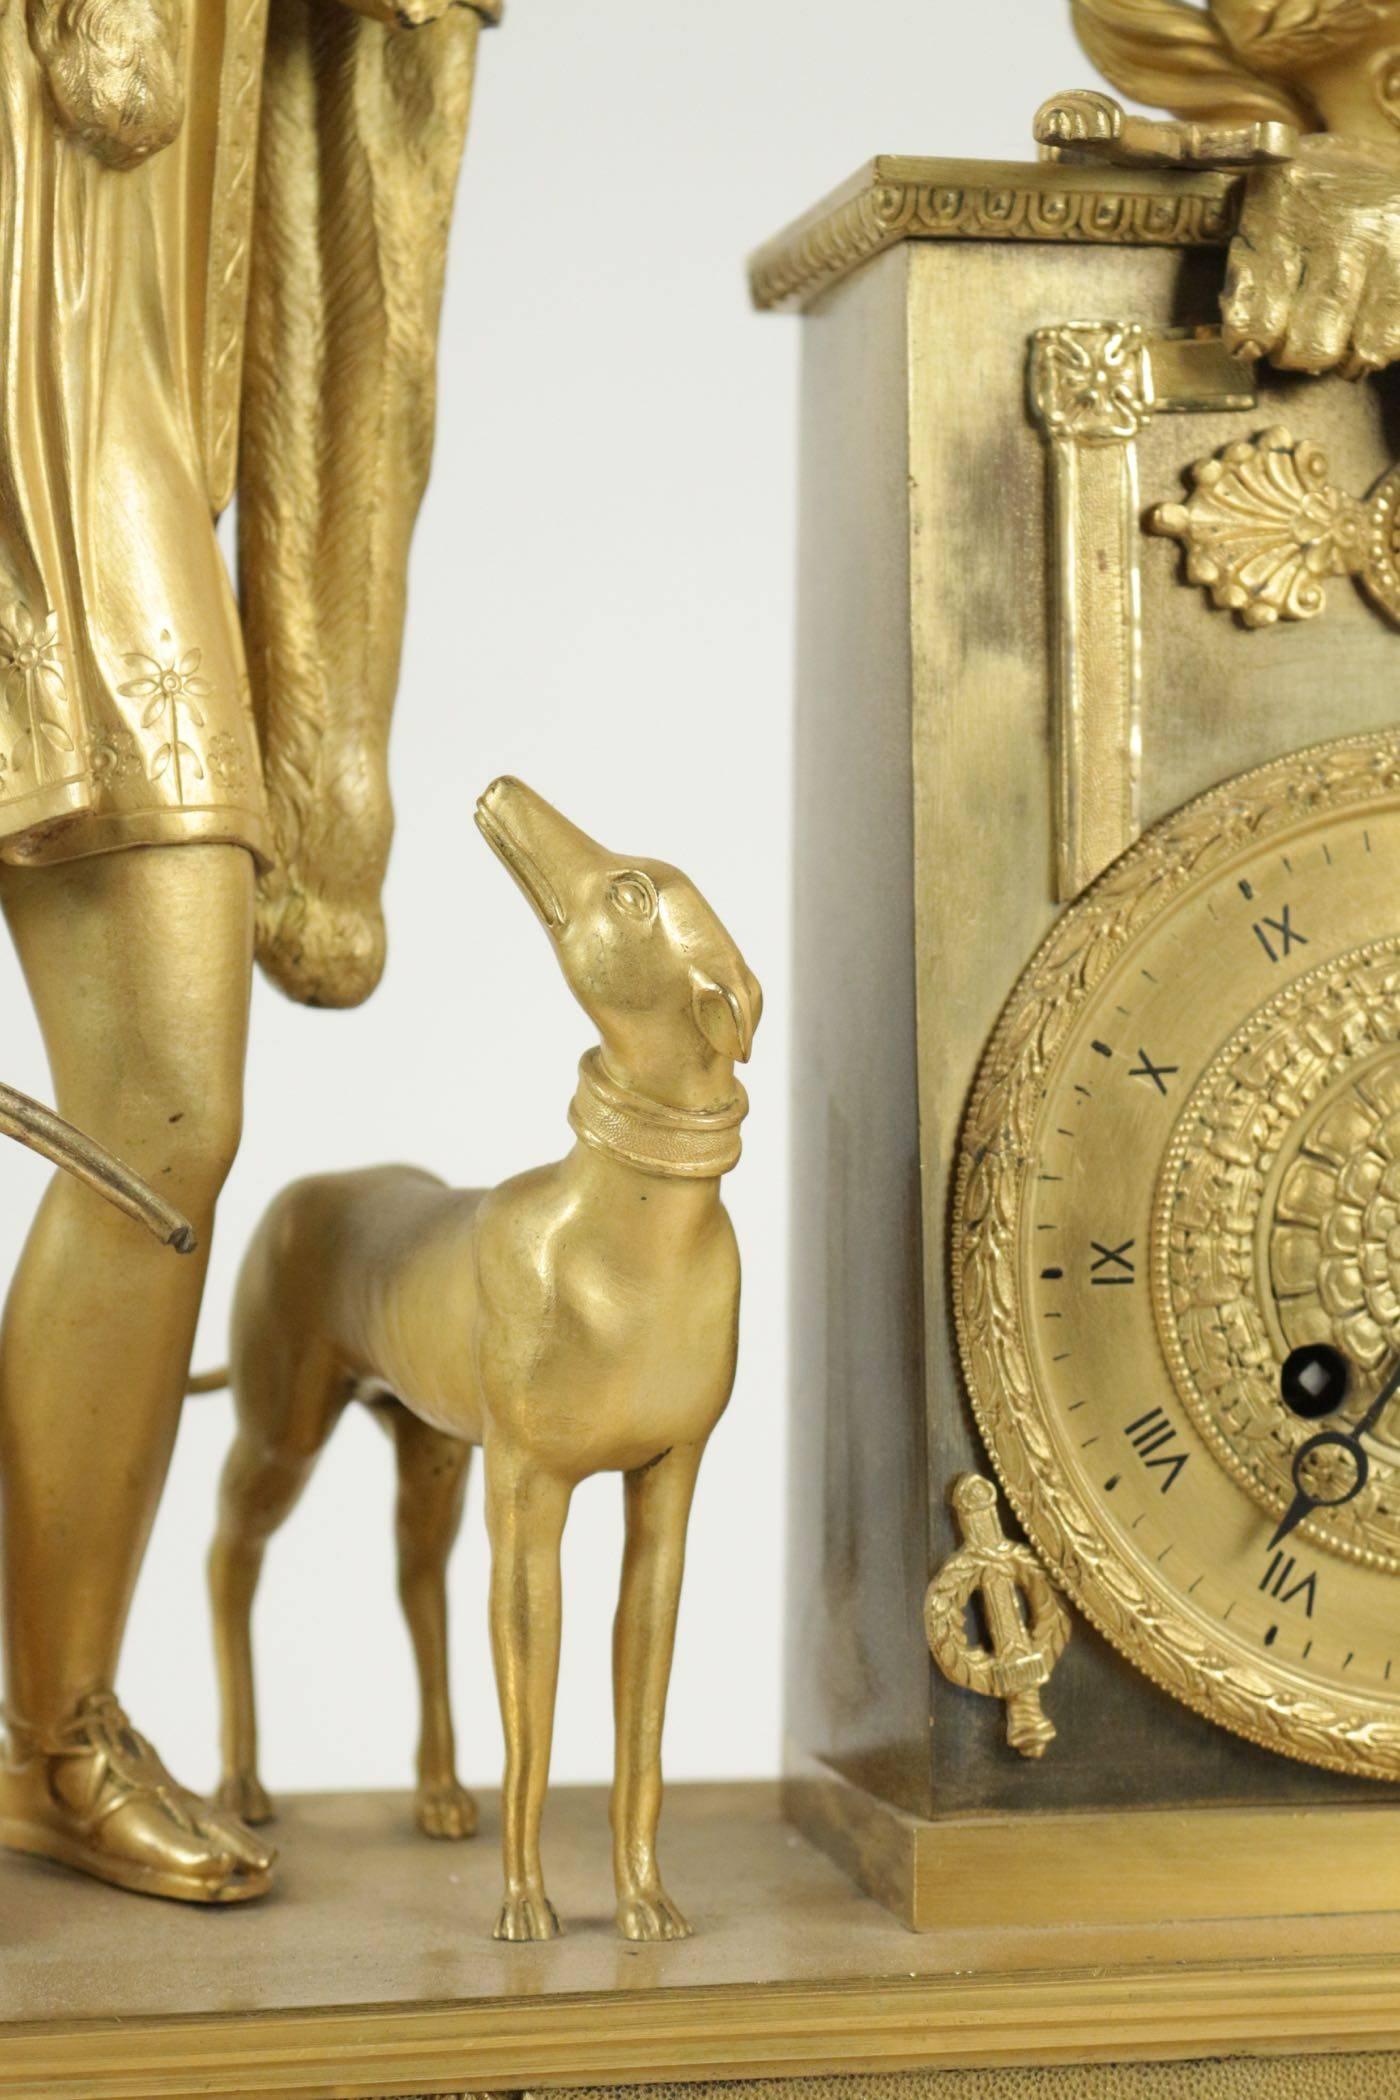 Gilt Empire Clock from the 19th Century